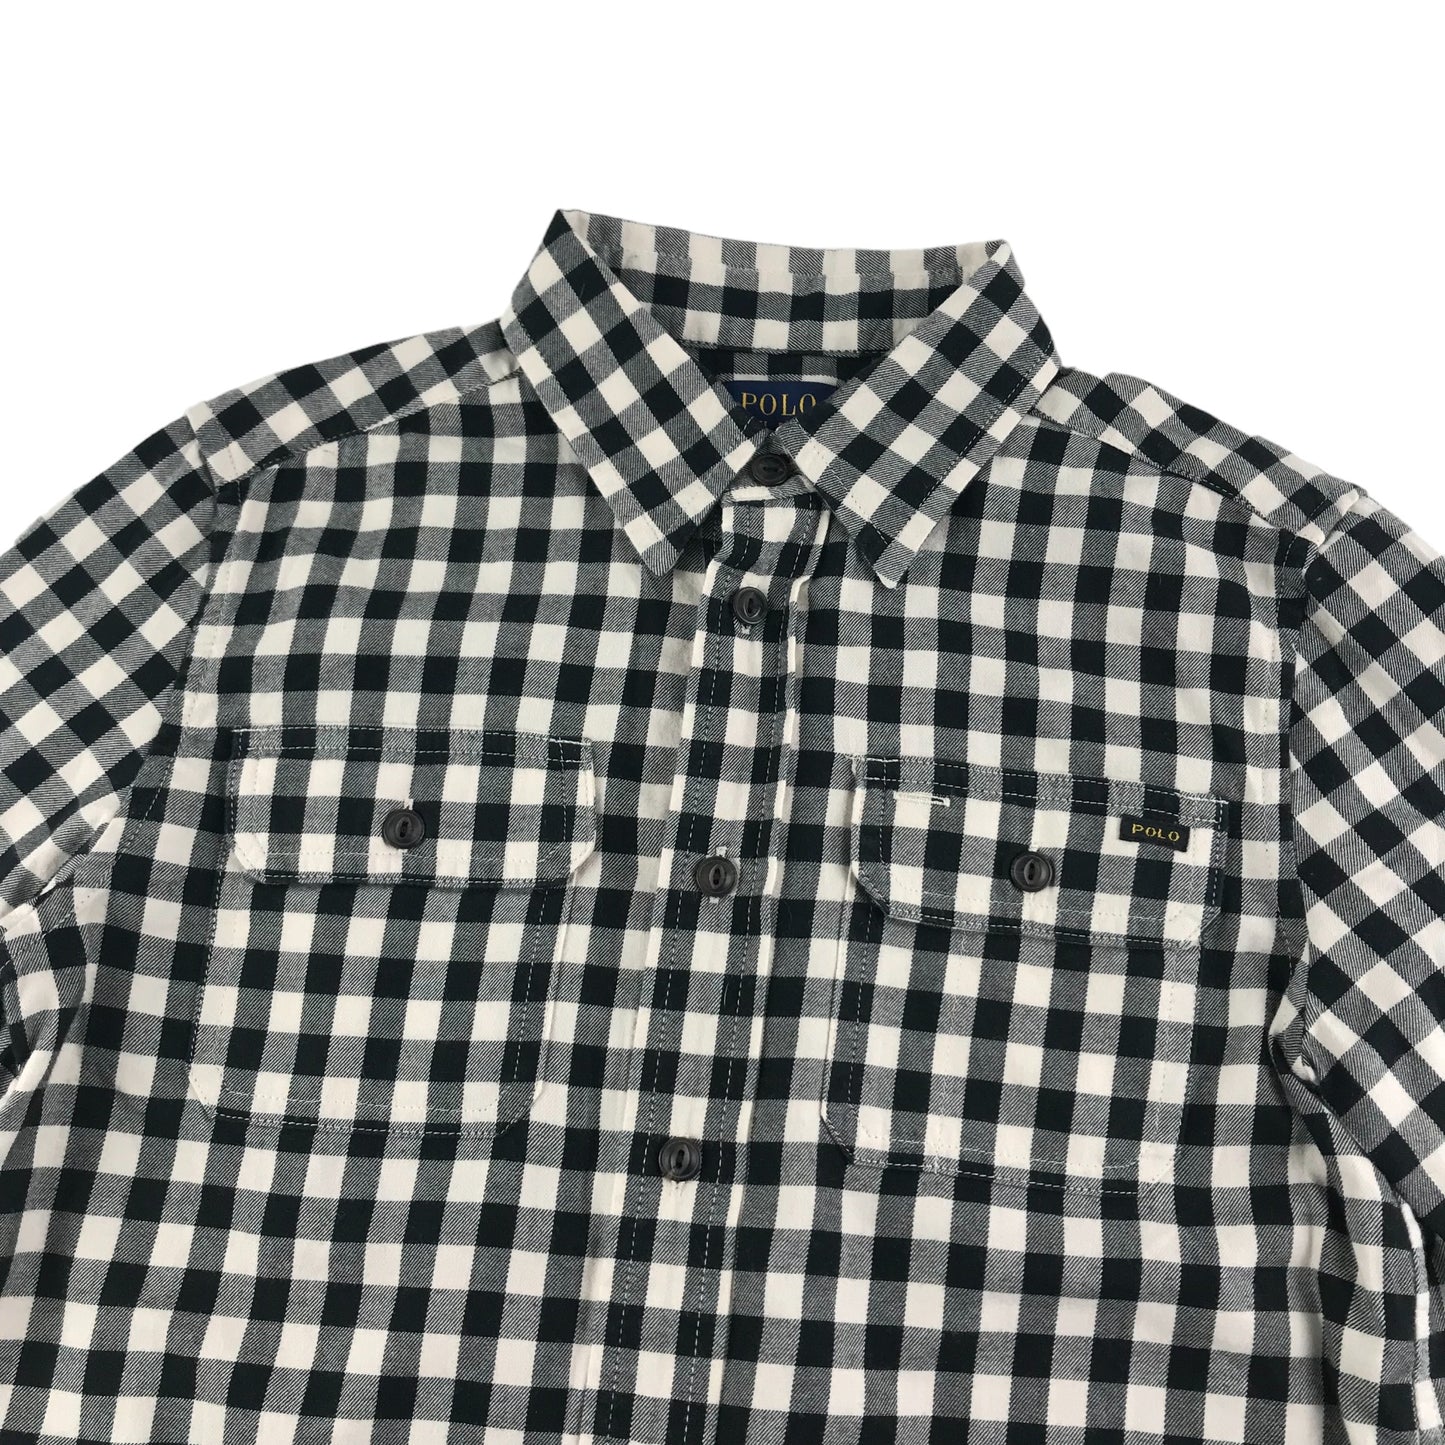 Ralph Lauren Shirt Age 6 Black and White Checked Long Sleeve Button Up Cotton